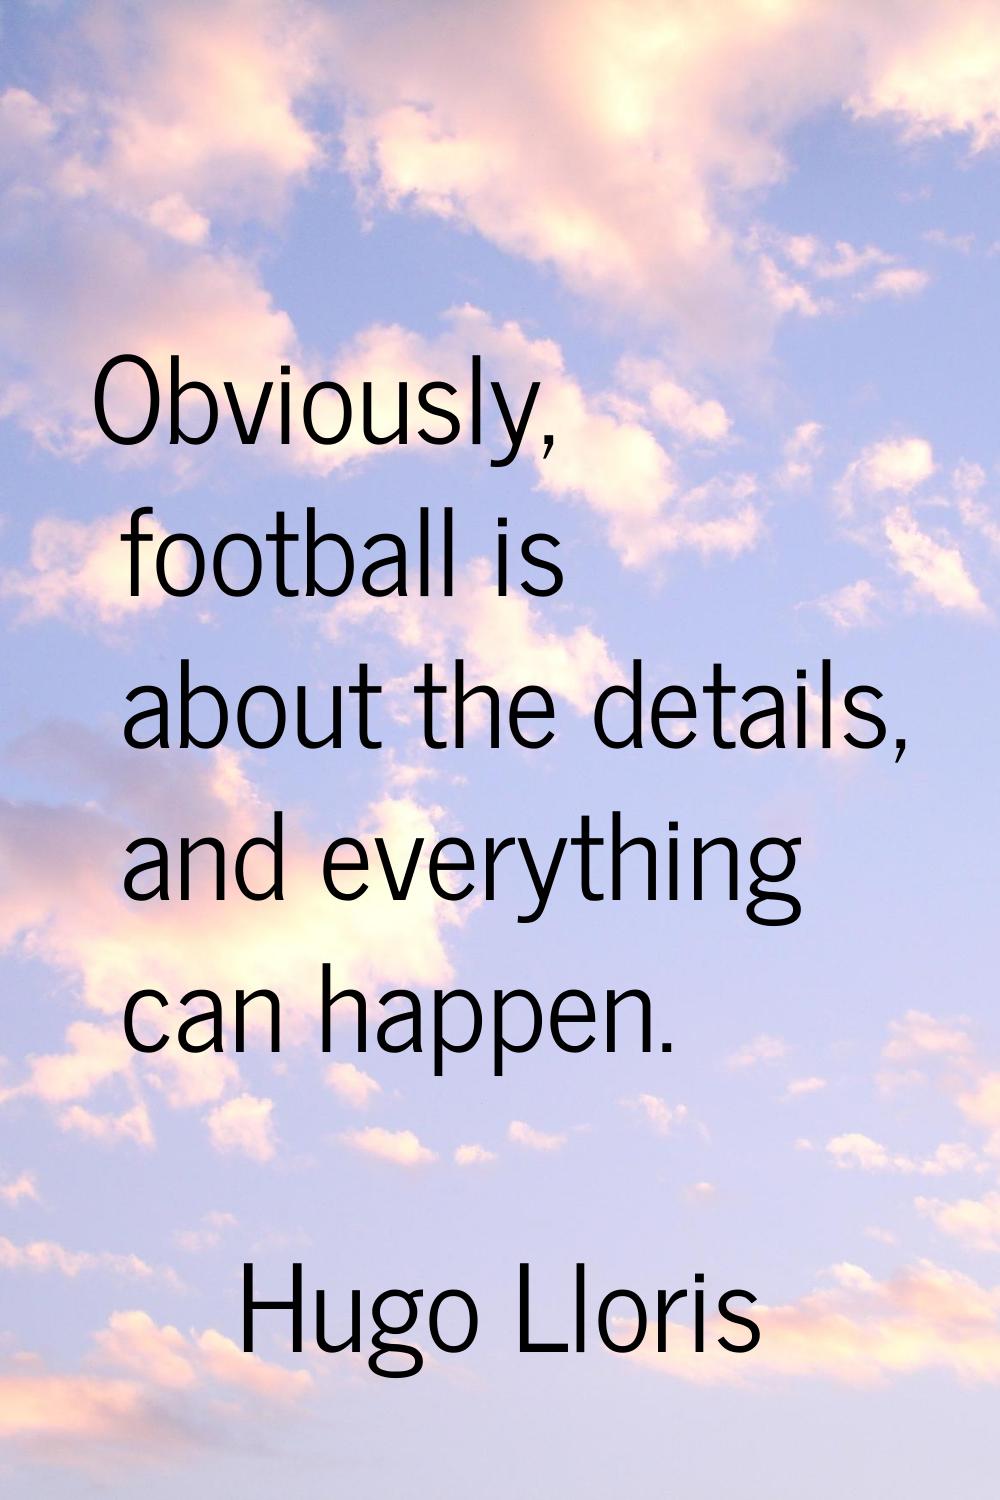 Obviously, football is about the details, and everything can happen.